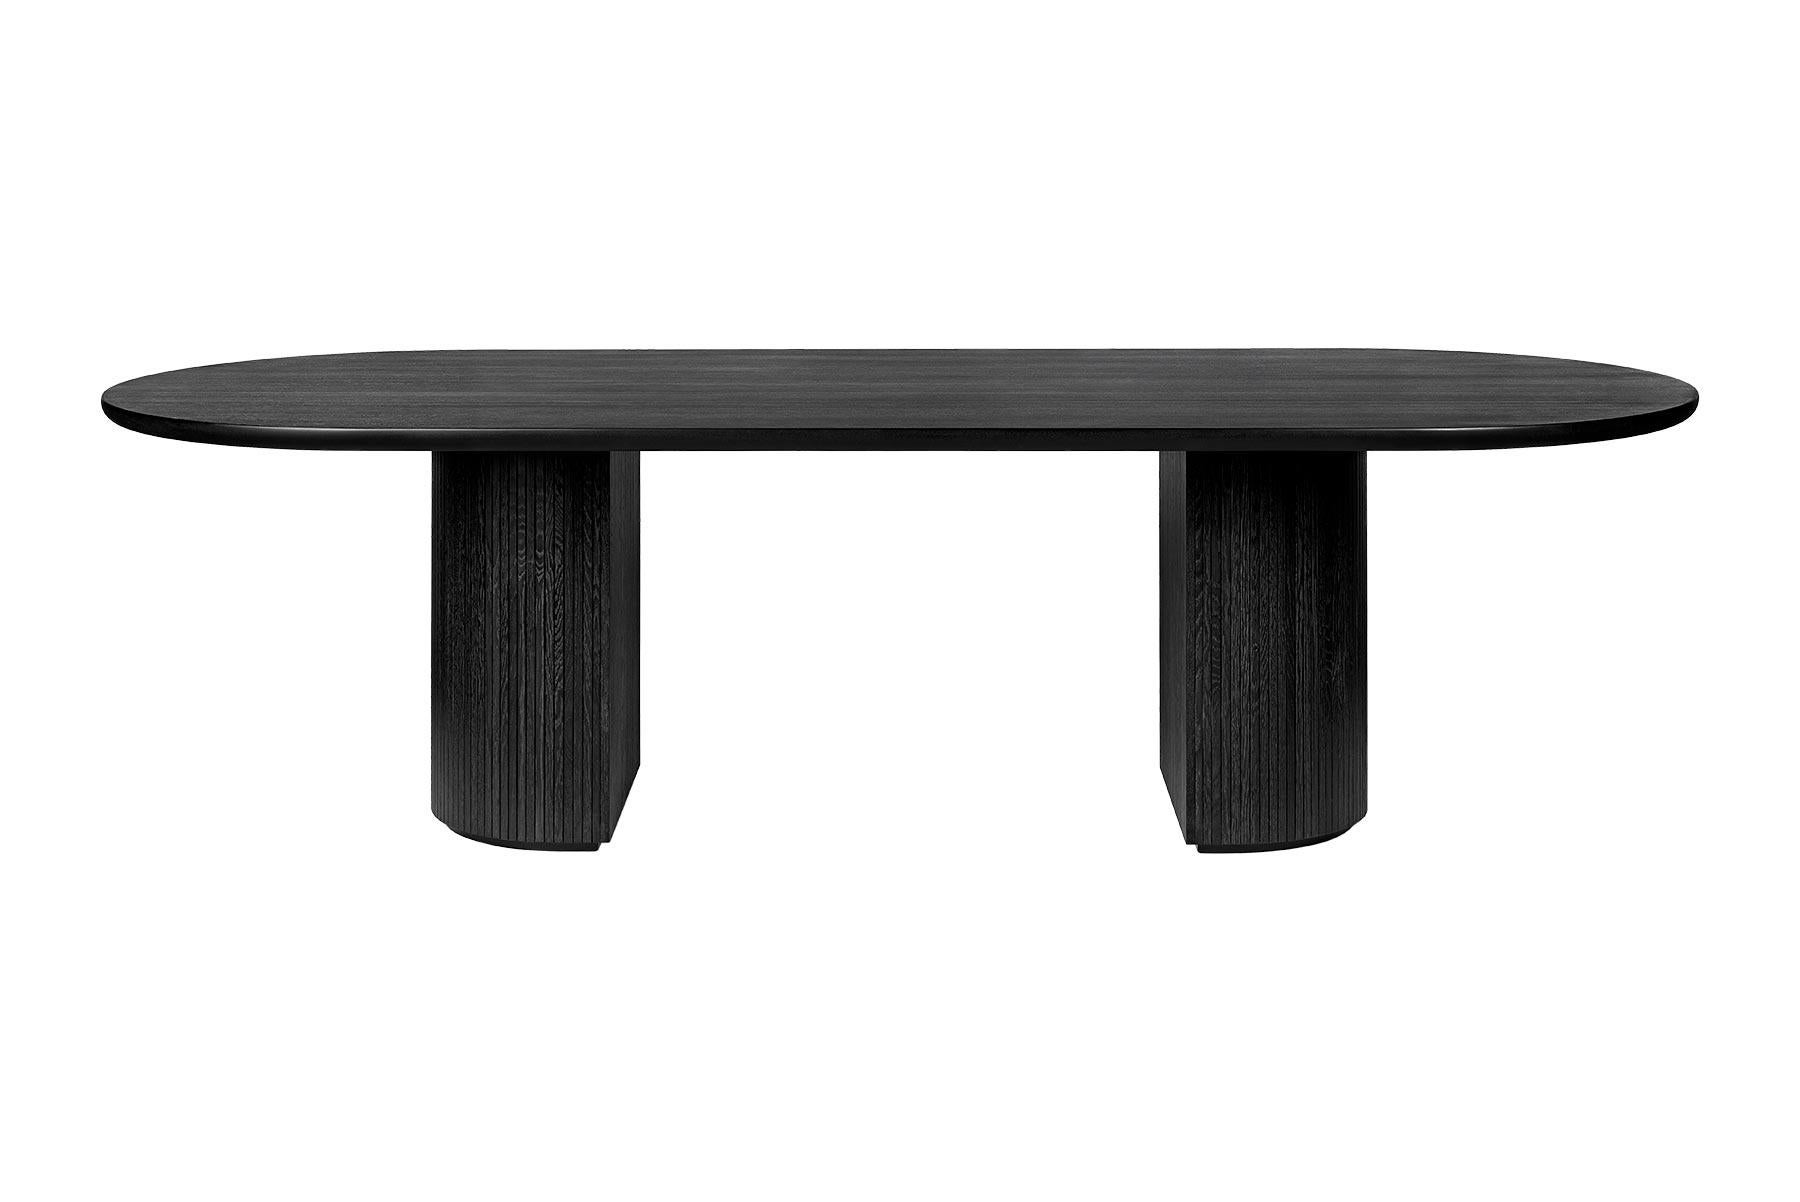 Space Copenhagen is the designer behind the Classic moon dining table, a series of organic rounded tables for both domestic and public spaces. The interplay between the beautiful solid oak tabletop and the smooth half – or full moon shaped base,